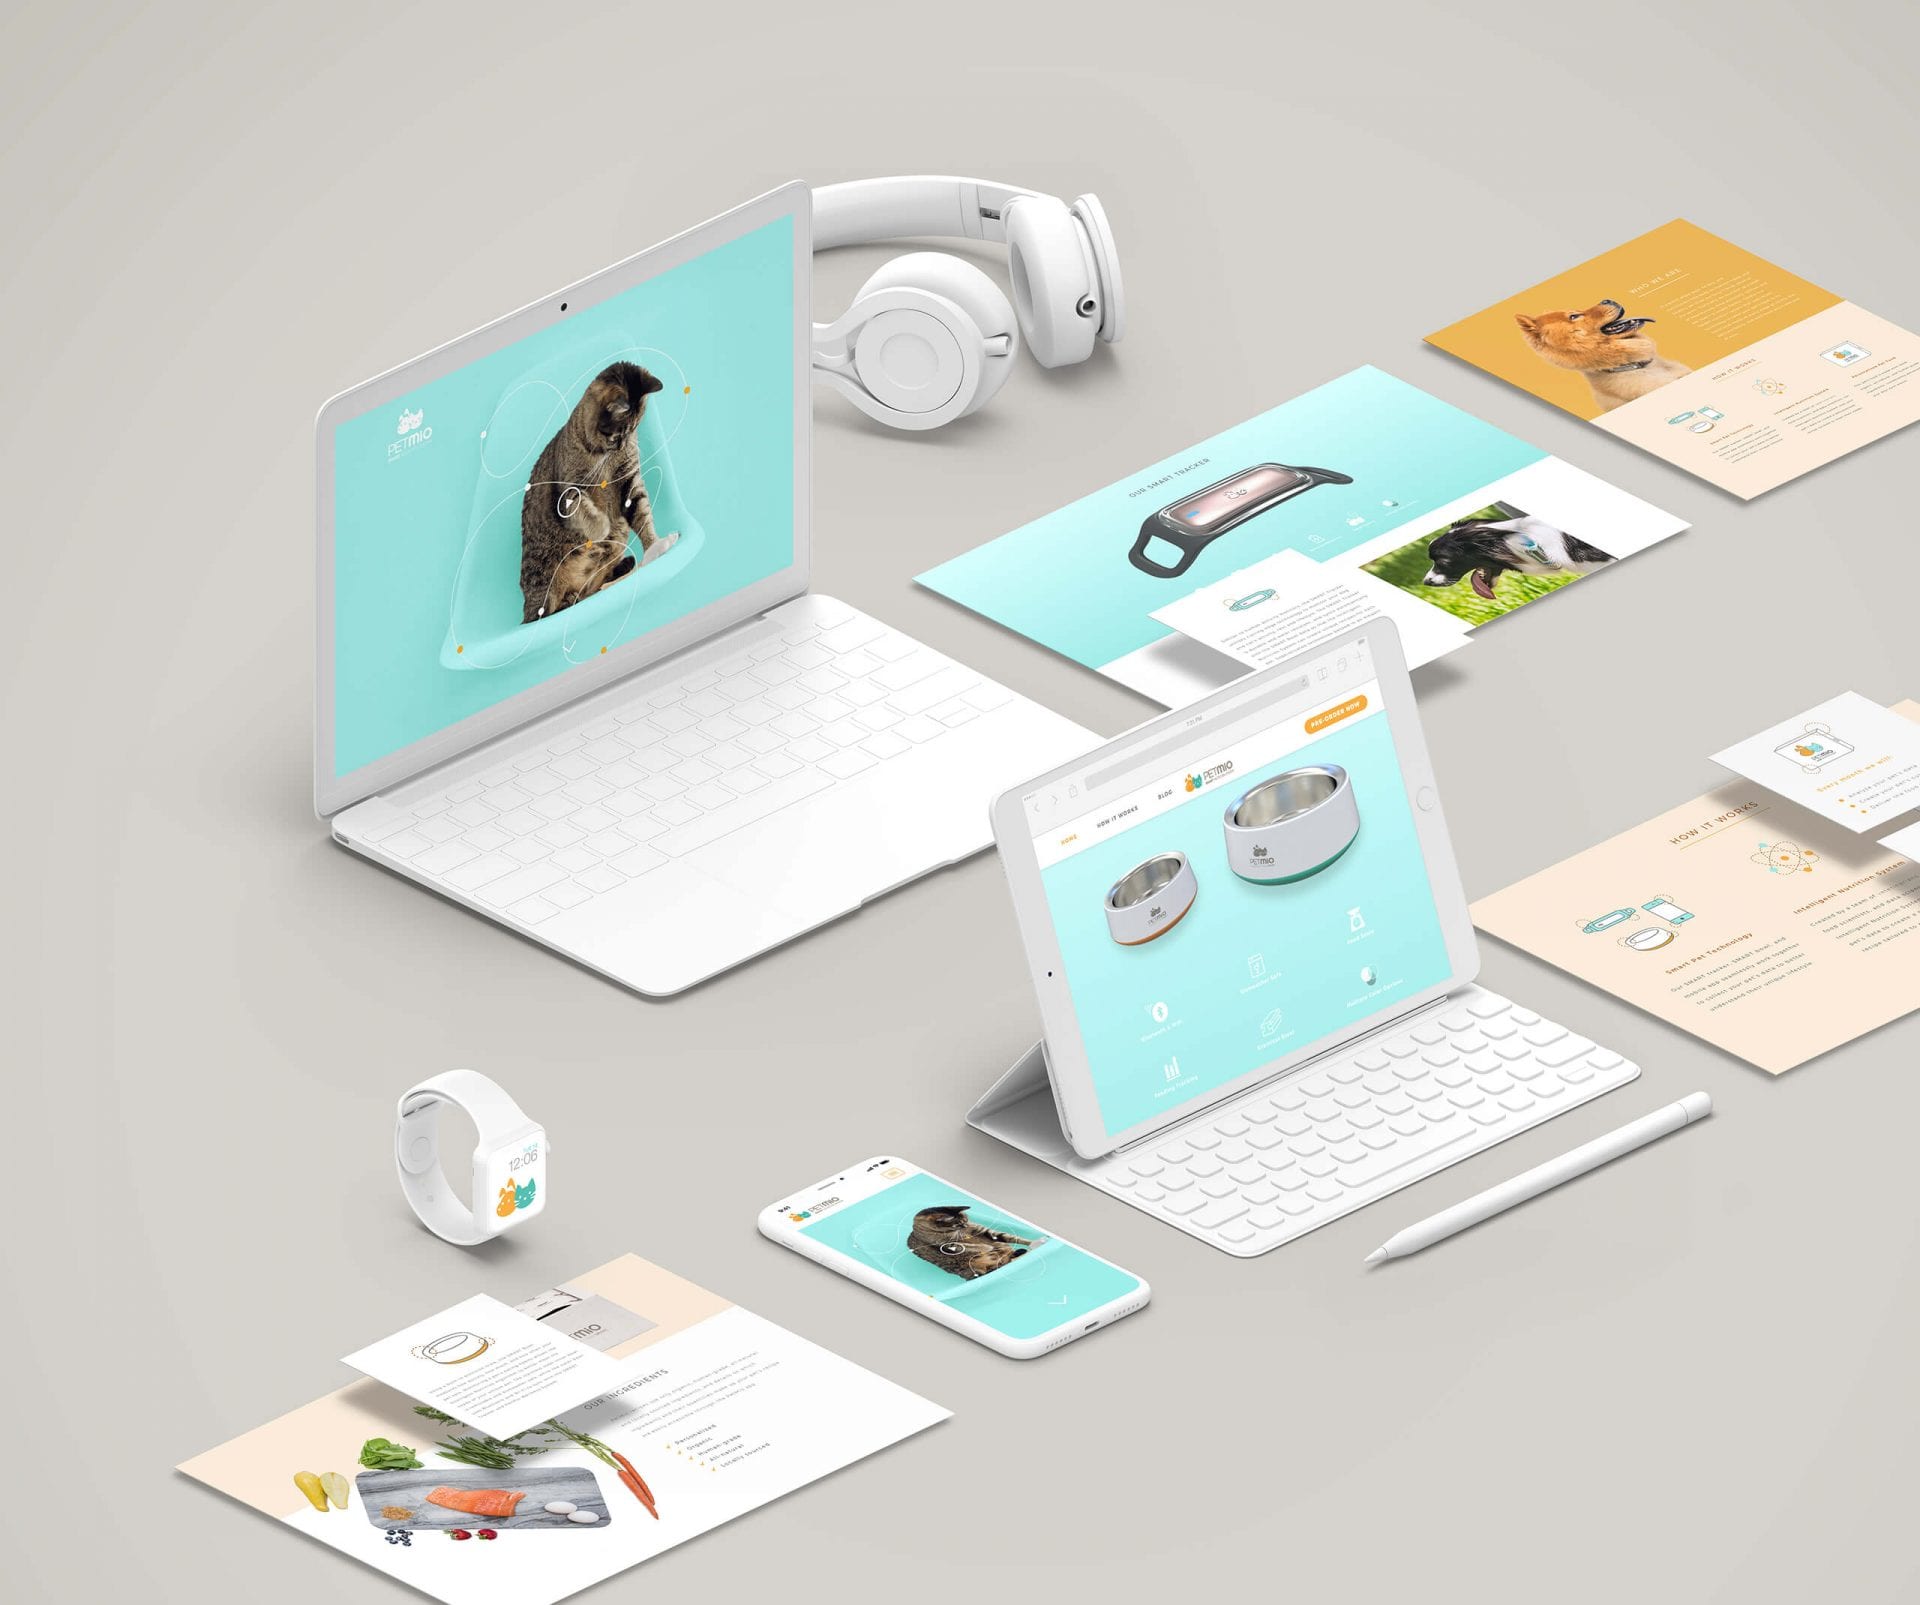 Petmio Mockup of various devices for a brand. Includes a watch, laptops, cell phone and headphones among other things.